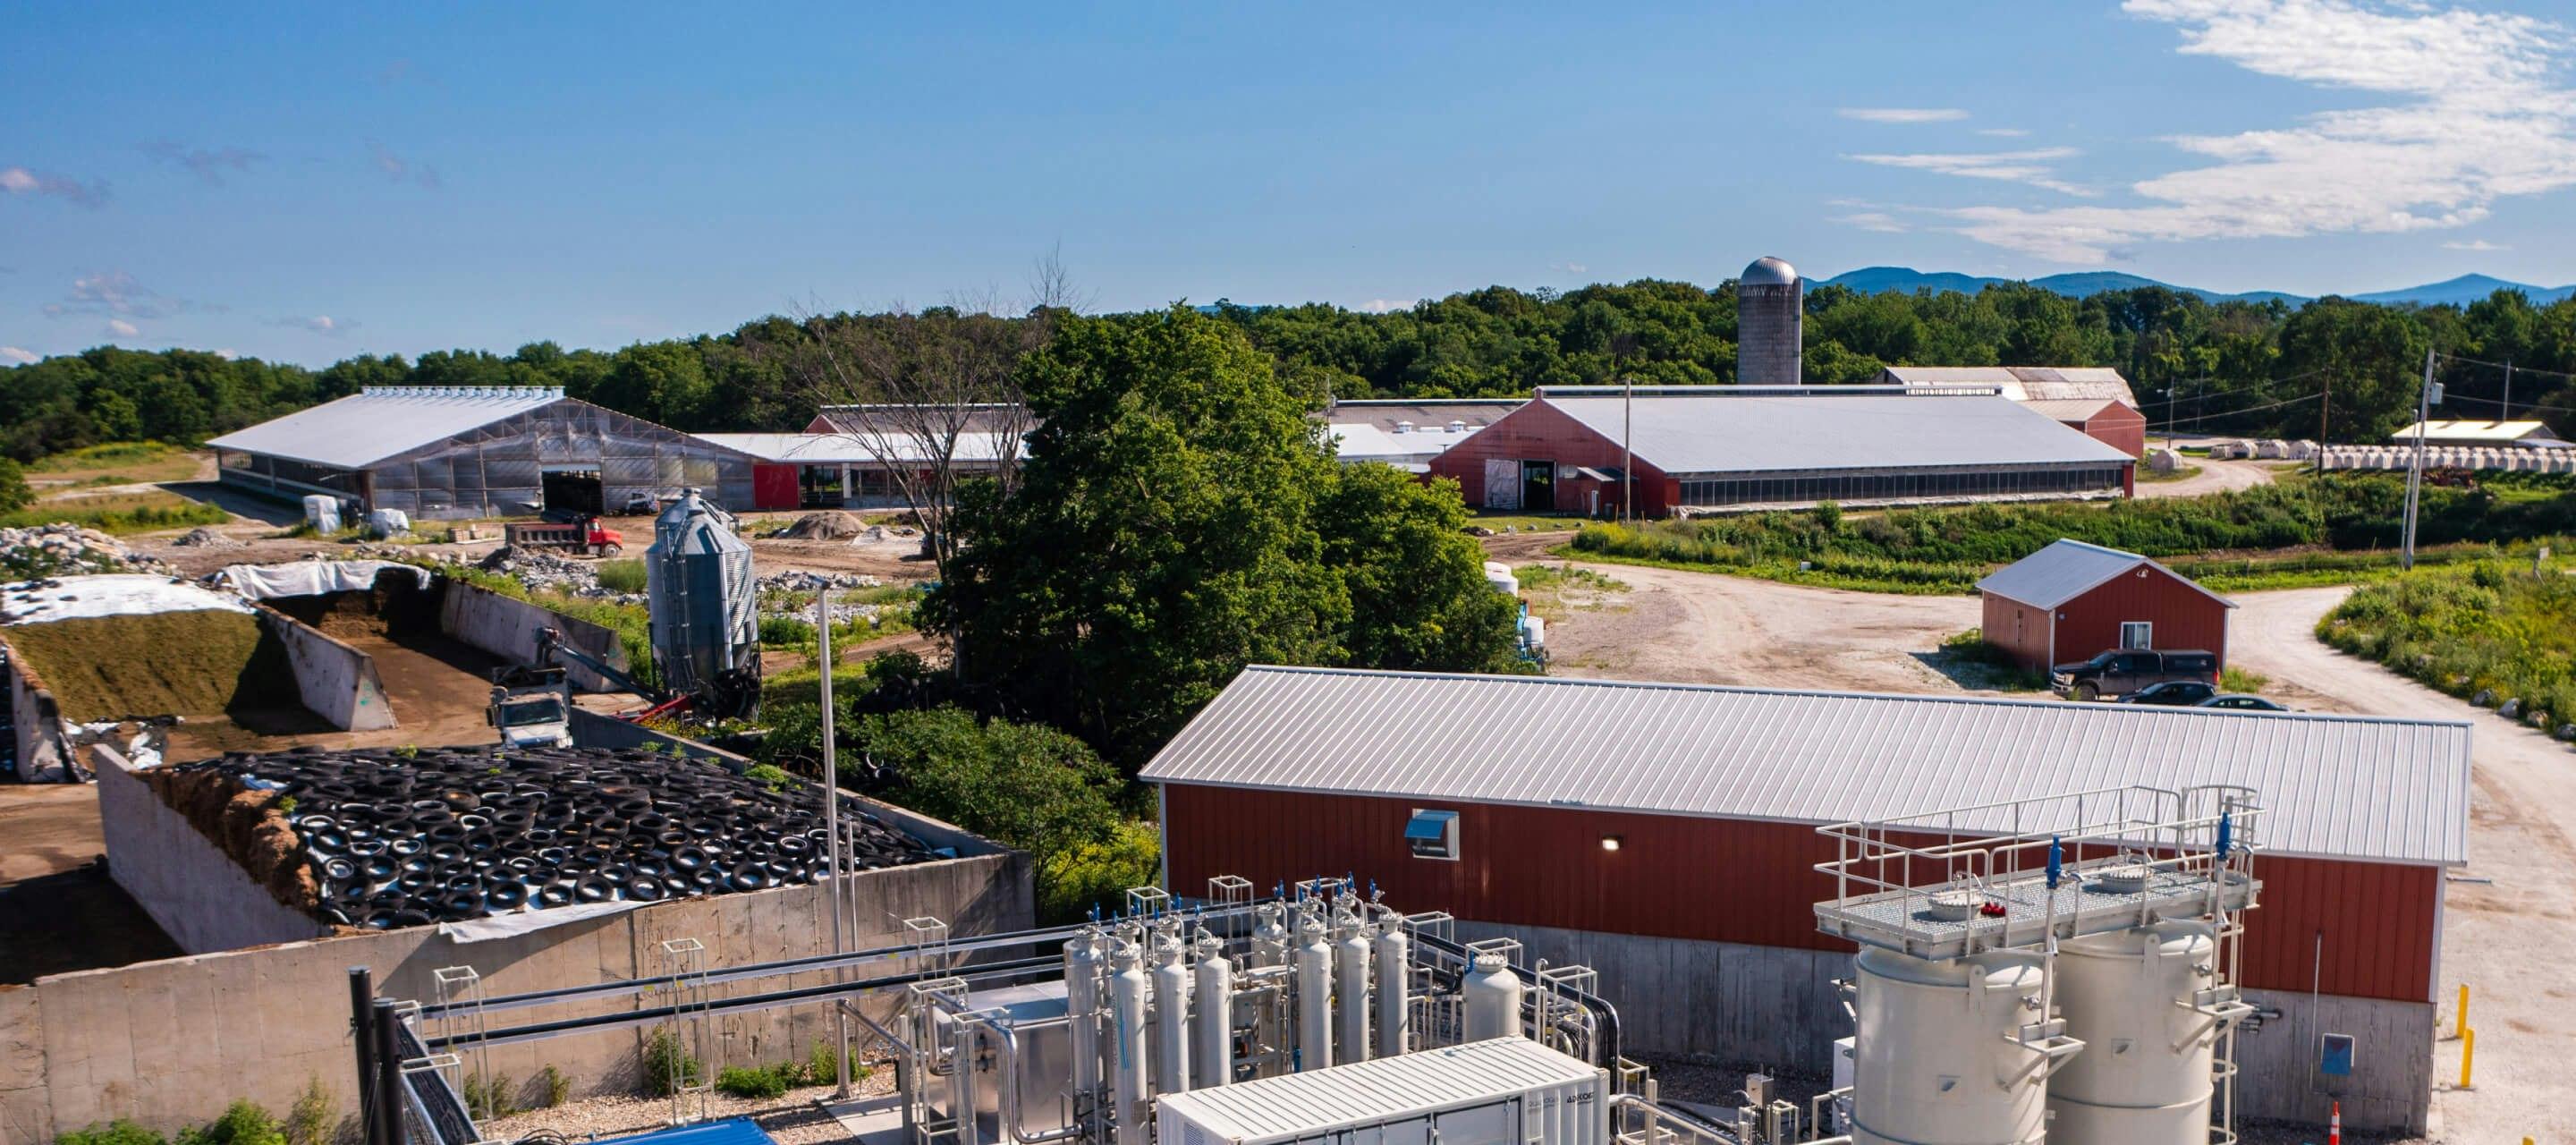 Farm with anaerobic digester that recycles food waste into renewable energy